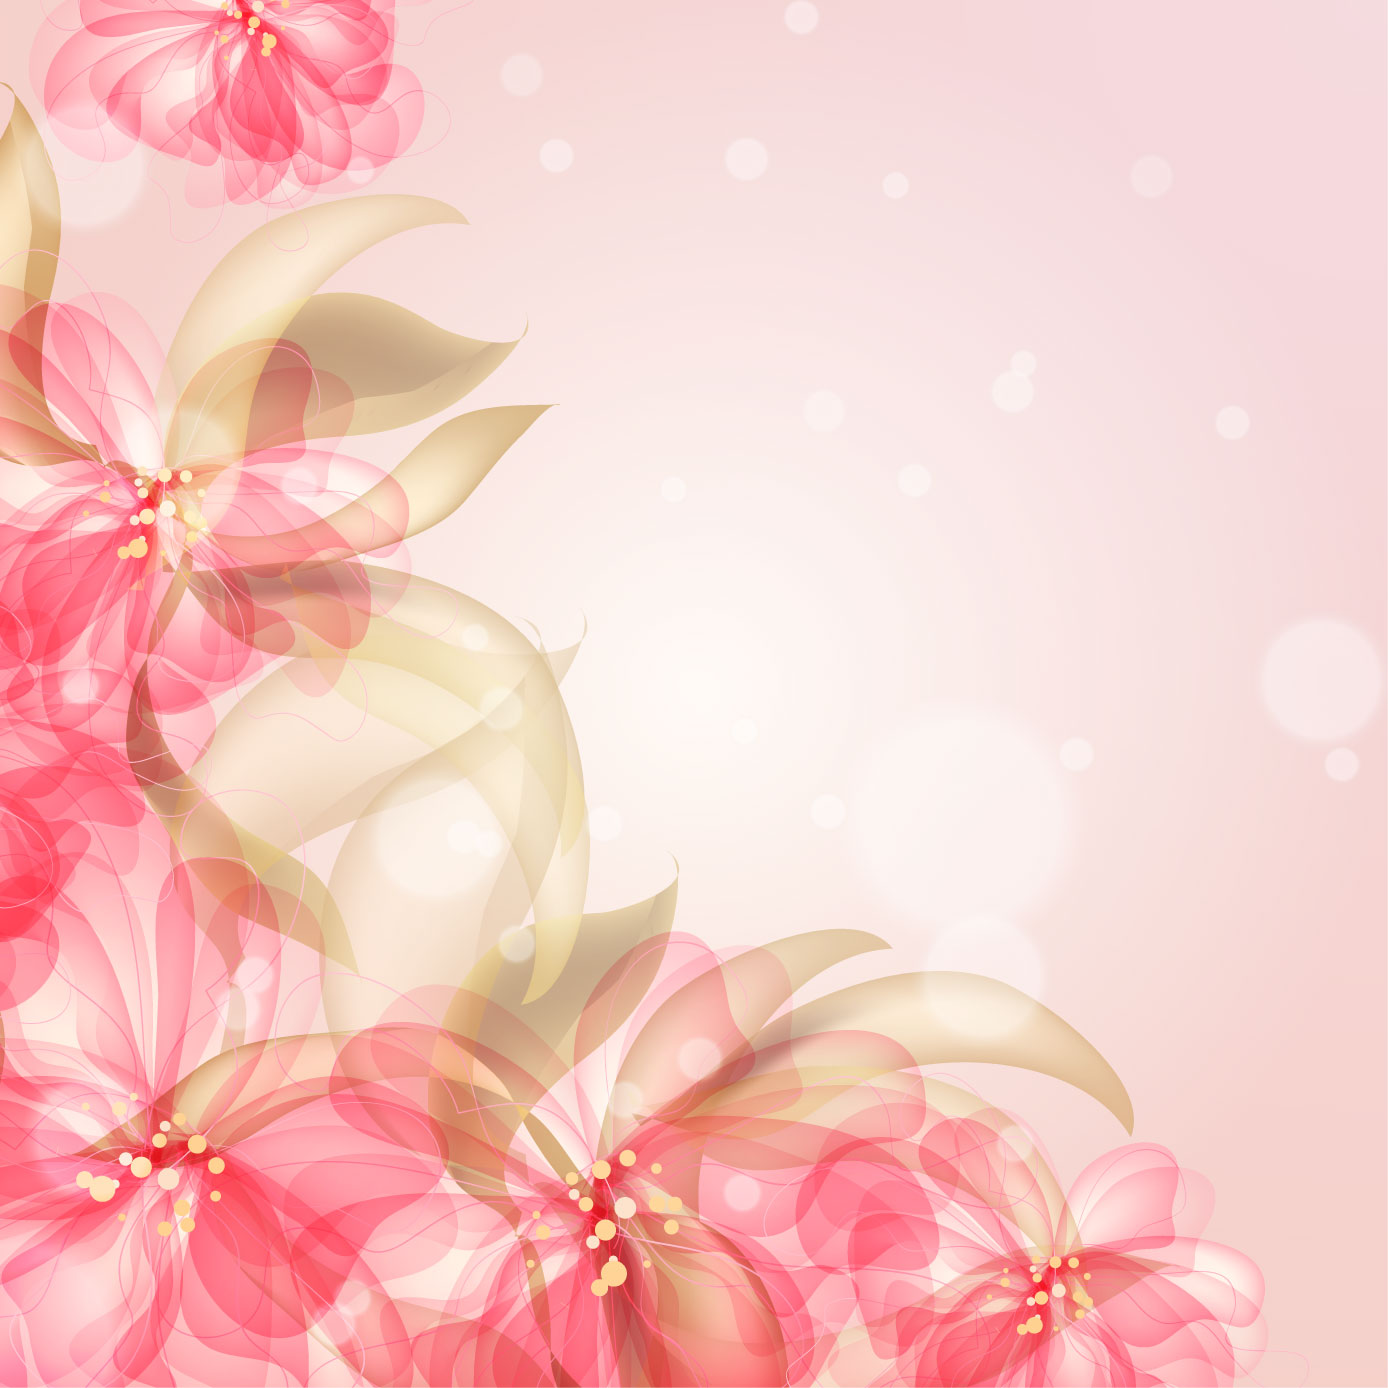 Colorful Flower Background Vector images